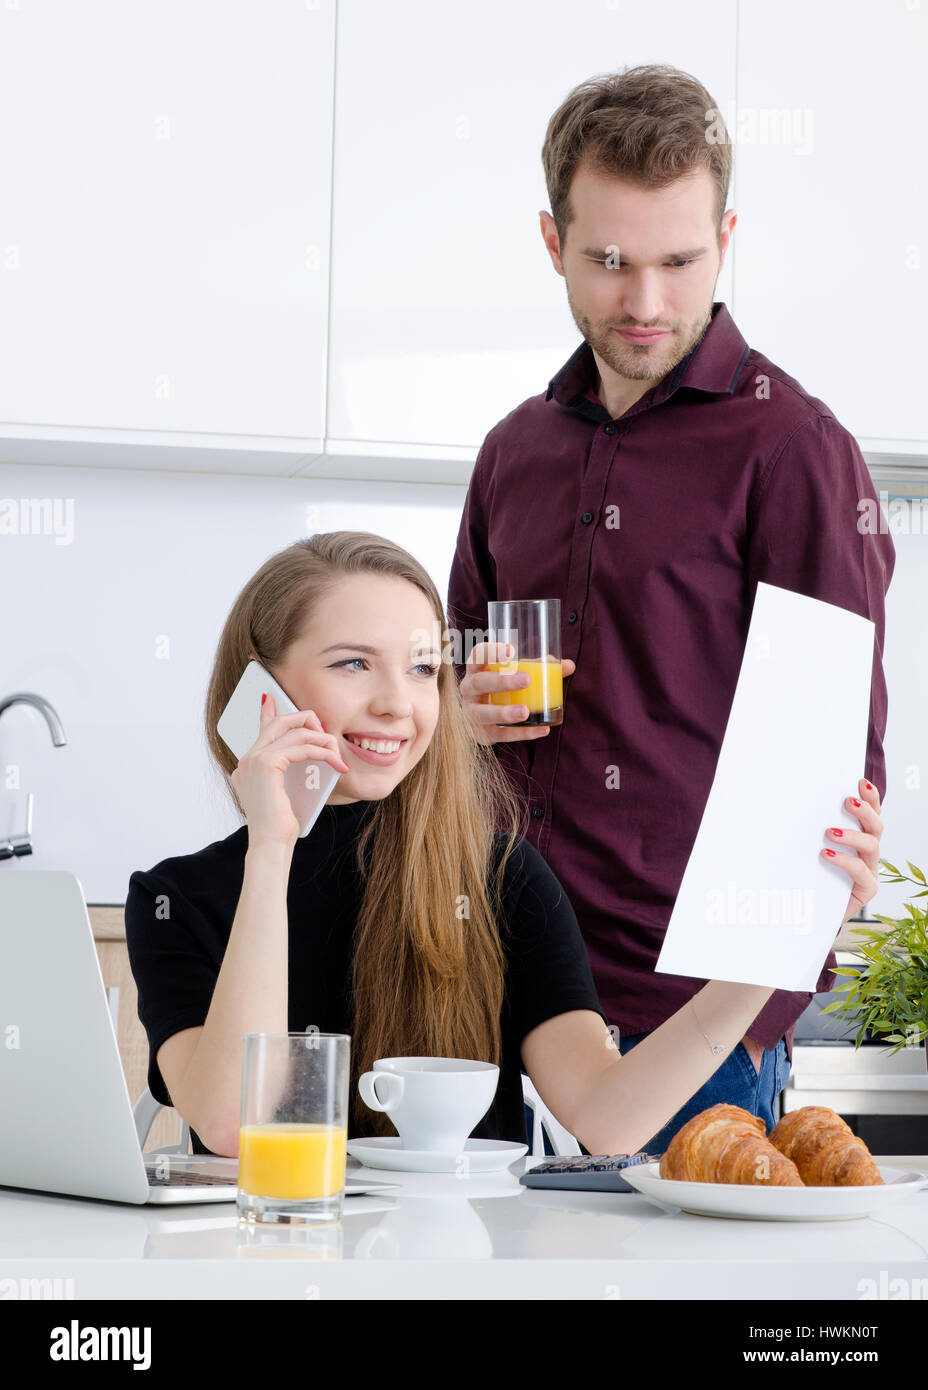 Young businesswoman working at home drinking coffee. home work woman laptop kitchen modern businesswoman couple concept Stock Photo